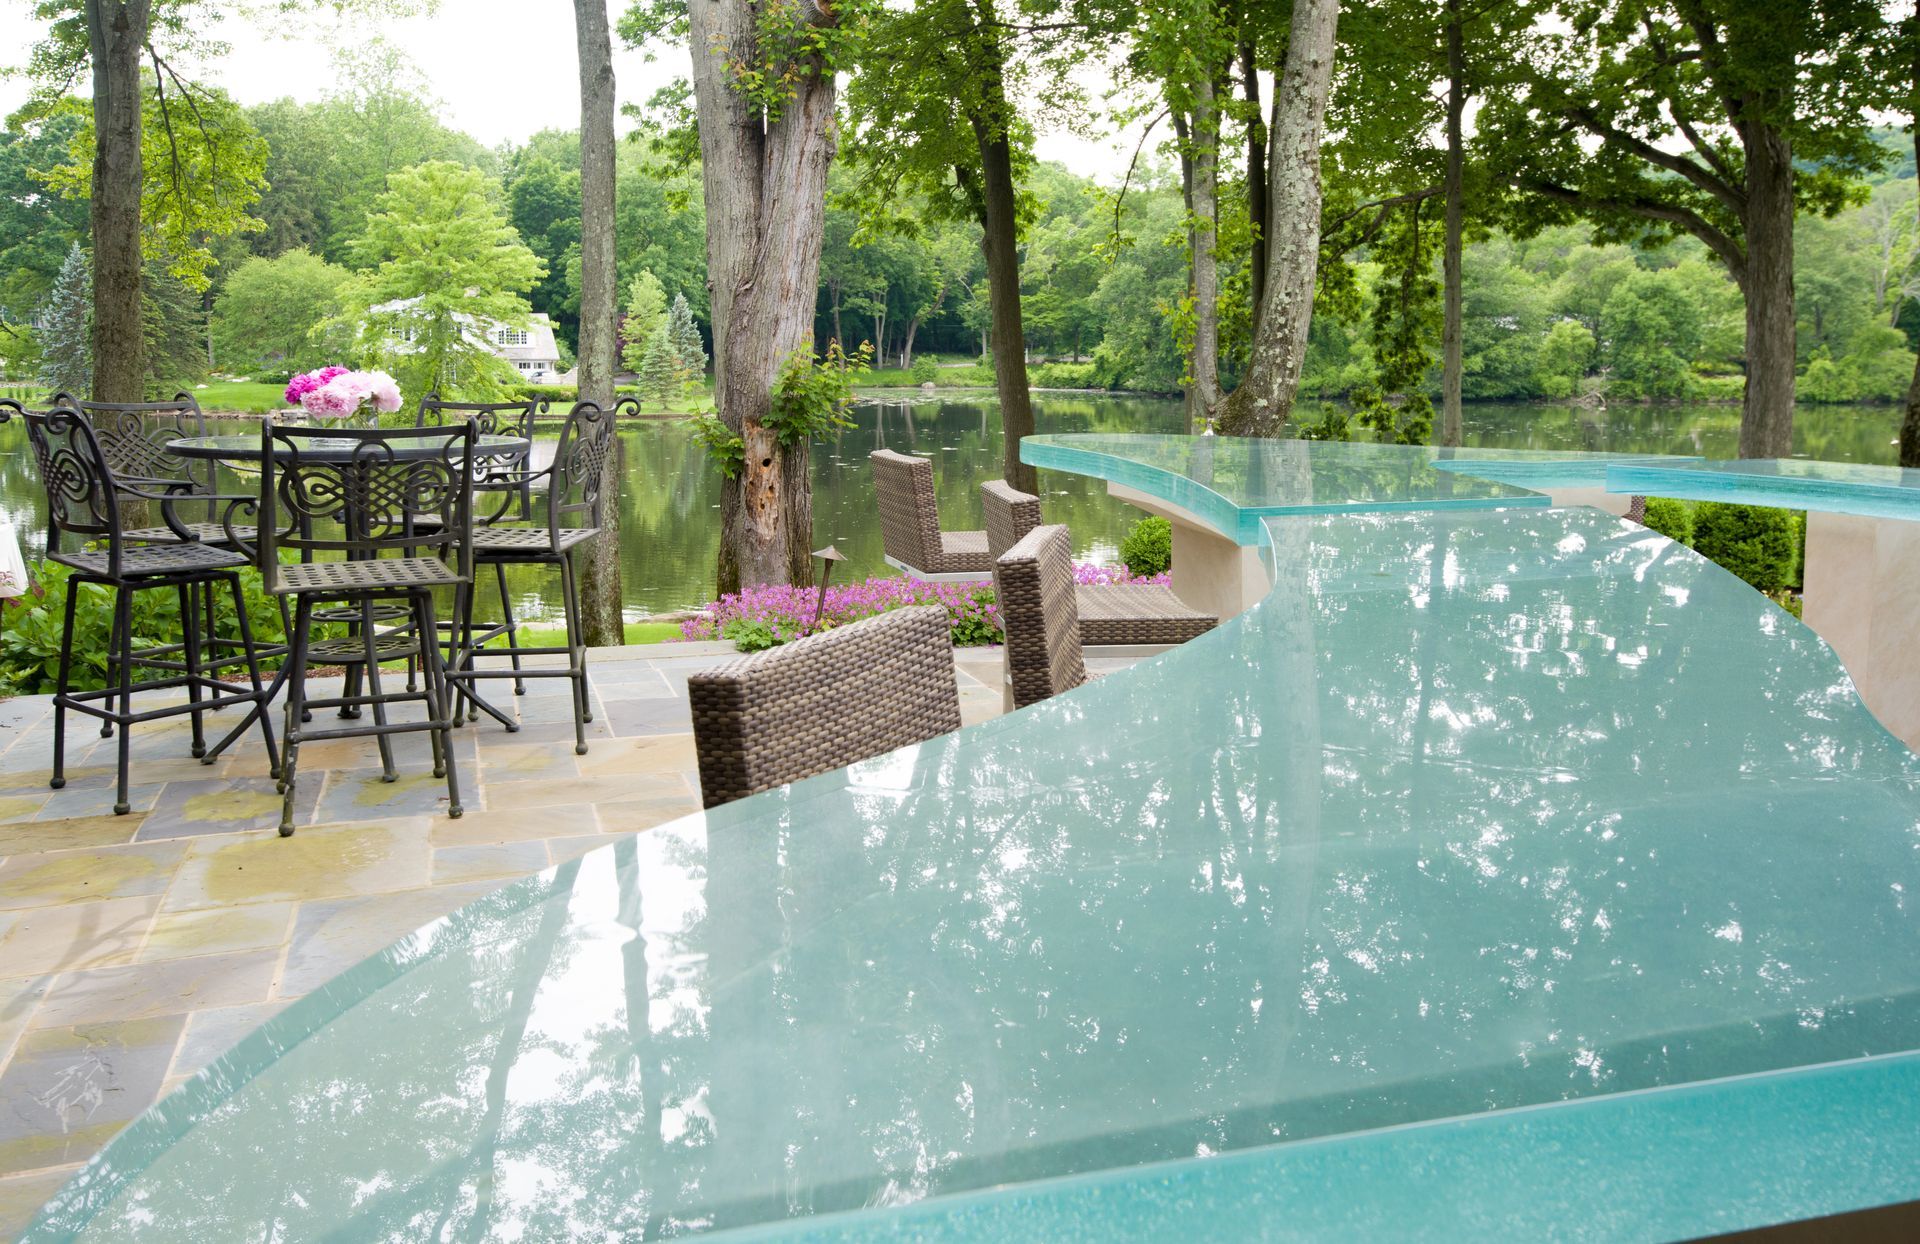 An outdoor glass countertop with thick glass.